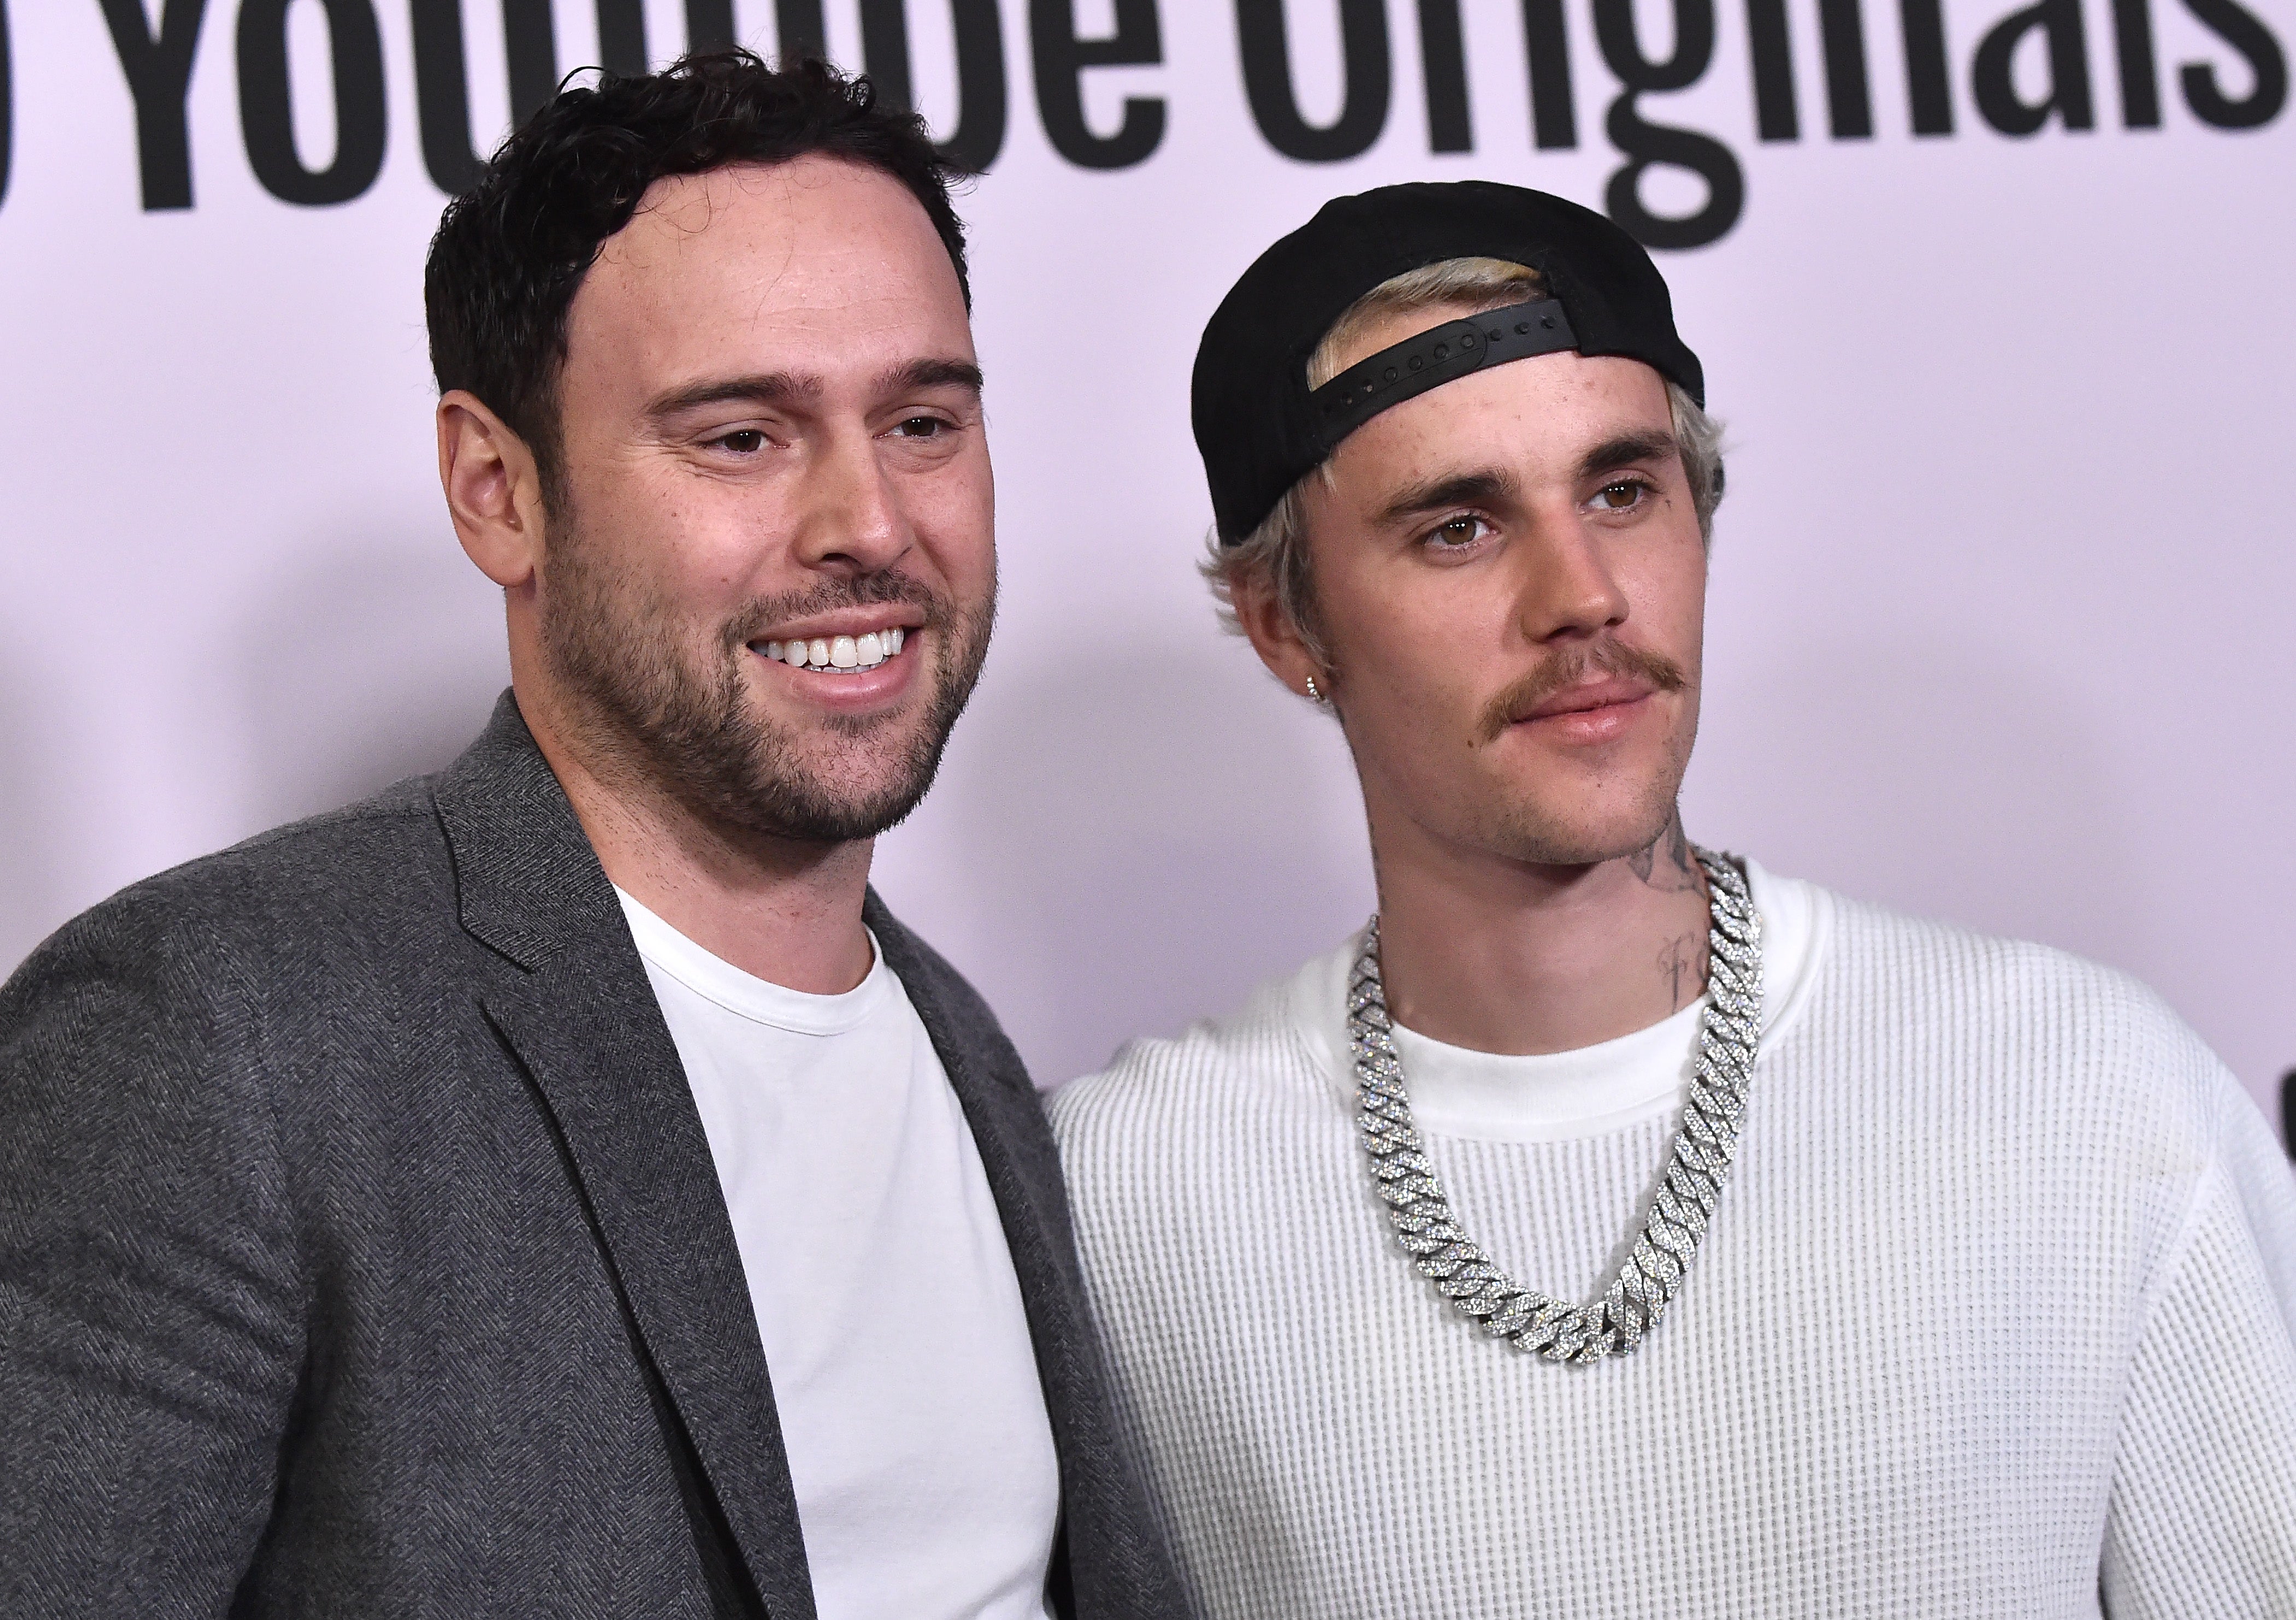 Scooter Braun (left) and Justin Bieber